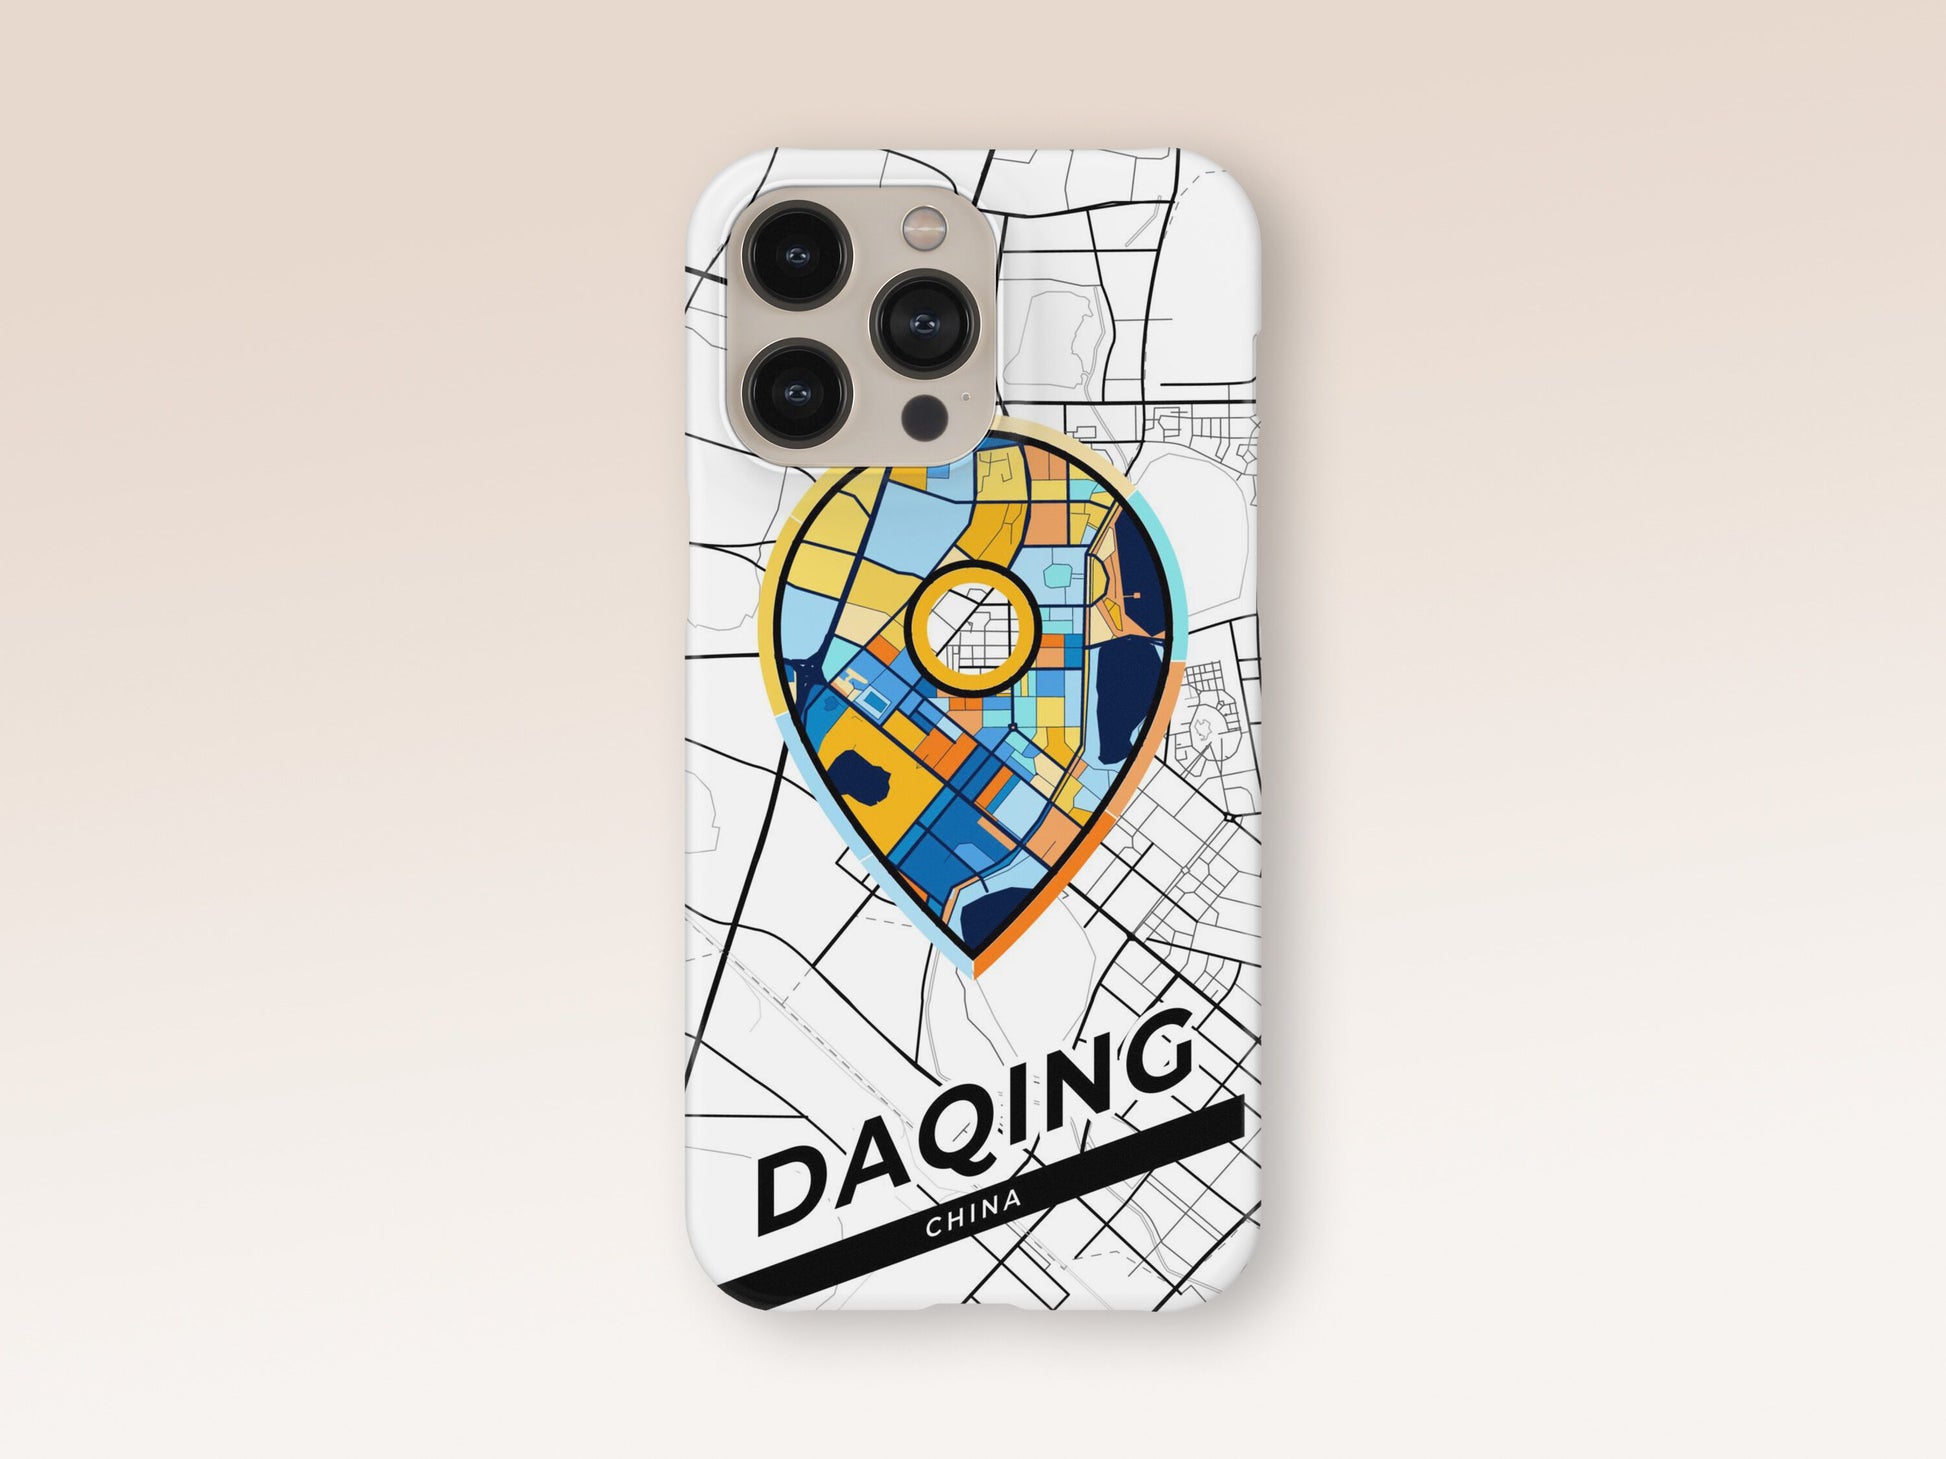 Daqing China slim phone case with colorful icon. Birthday, wedding or housewarming gift. Couple match cases. 1